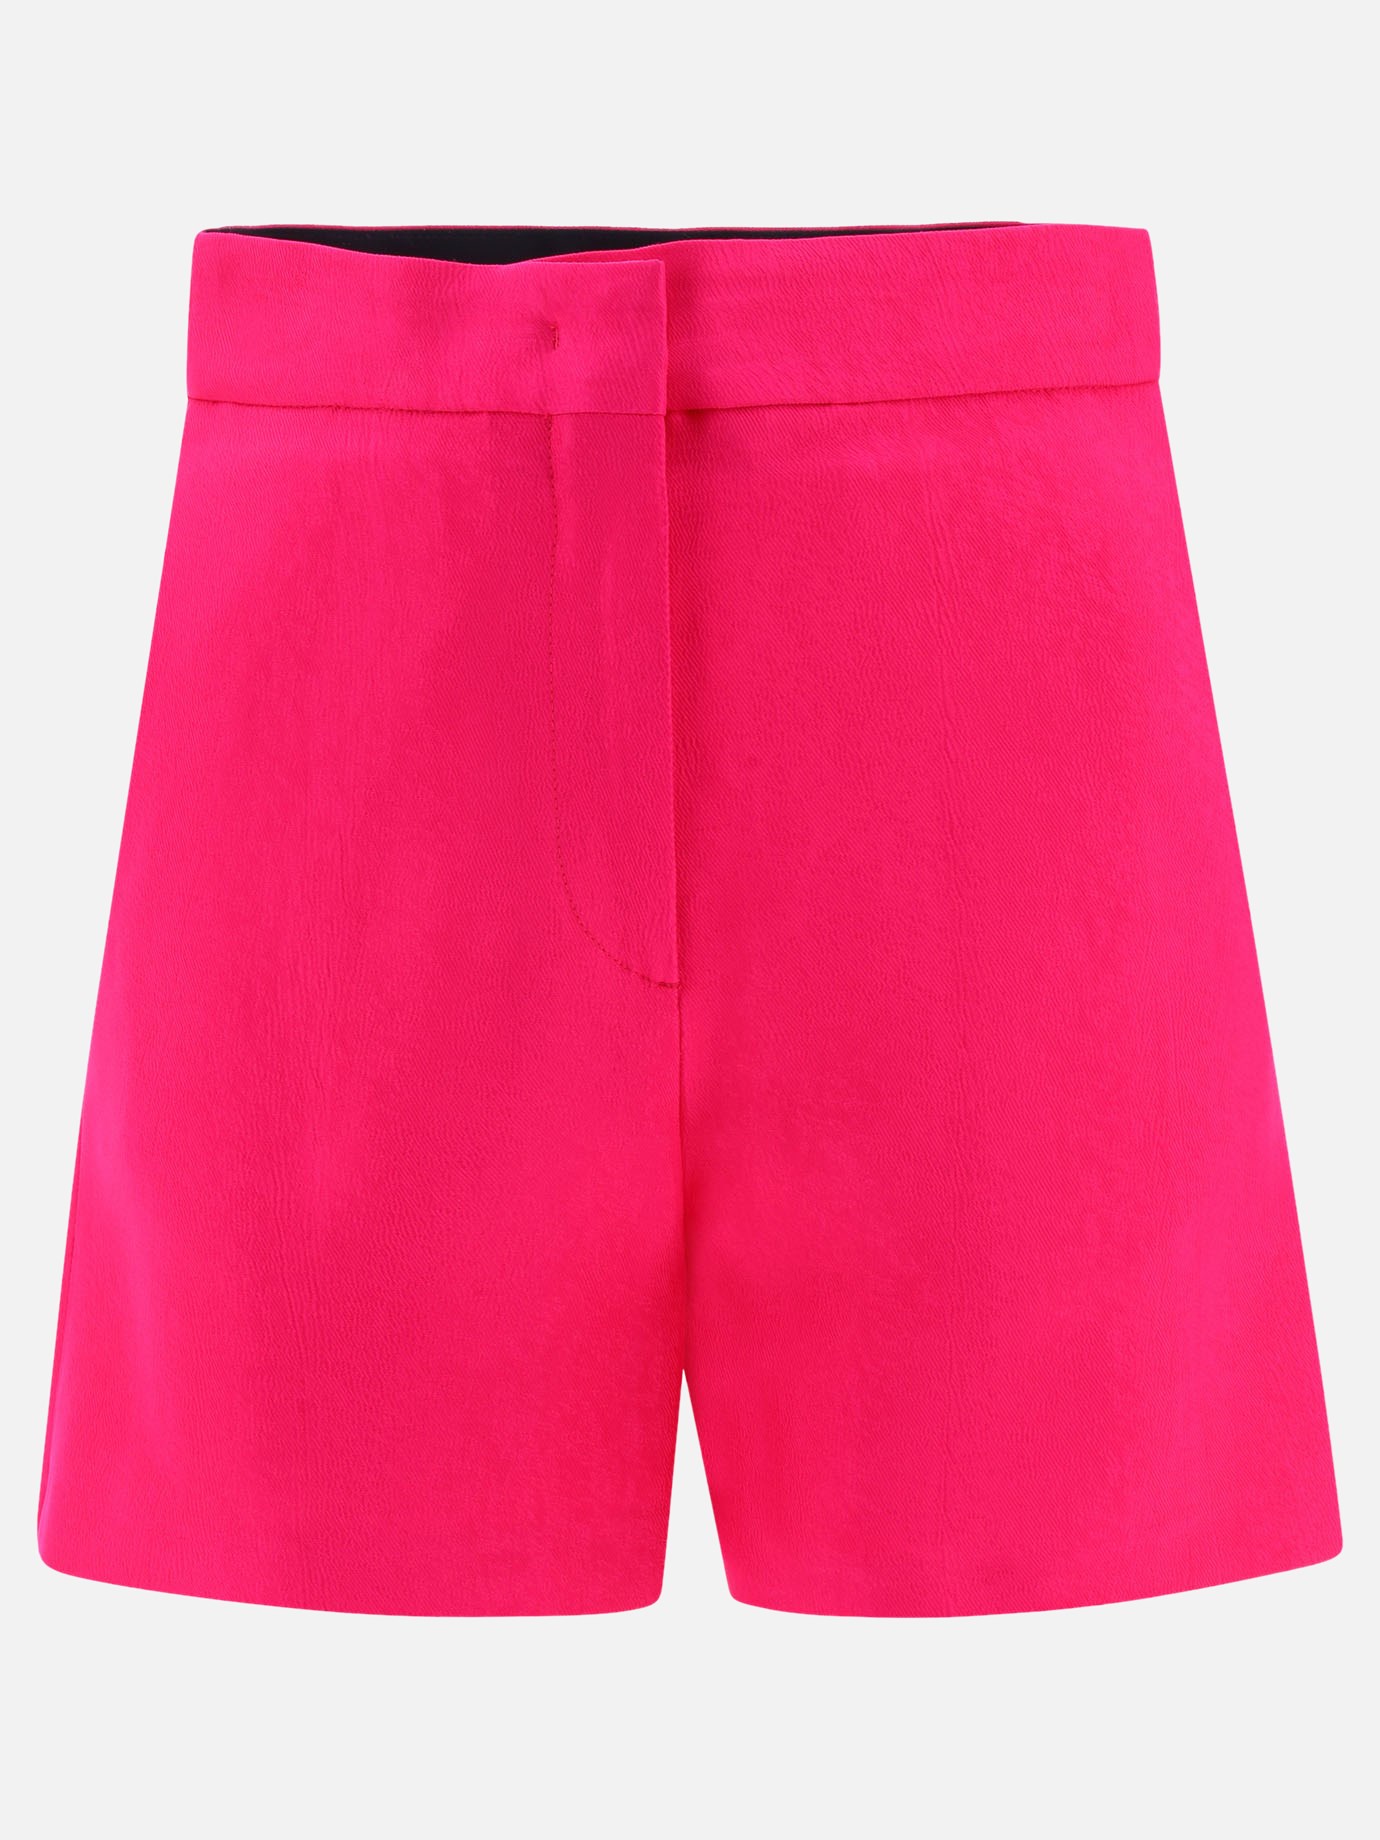 Tailored shortsby Msgm - 2